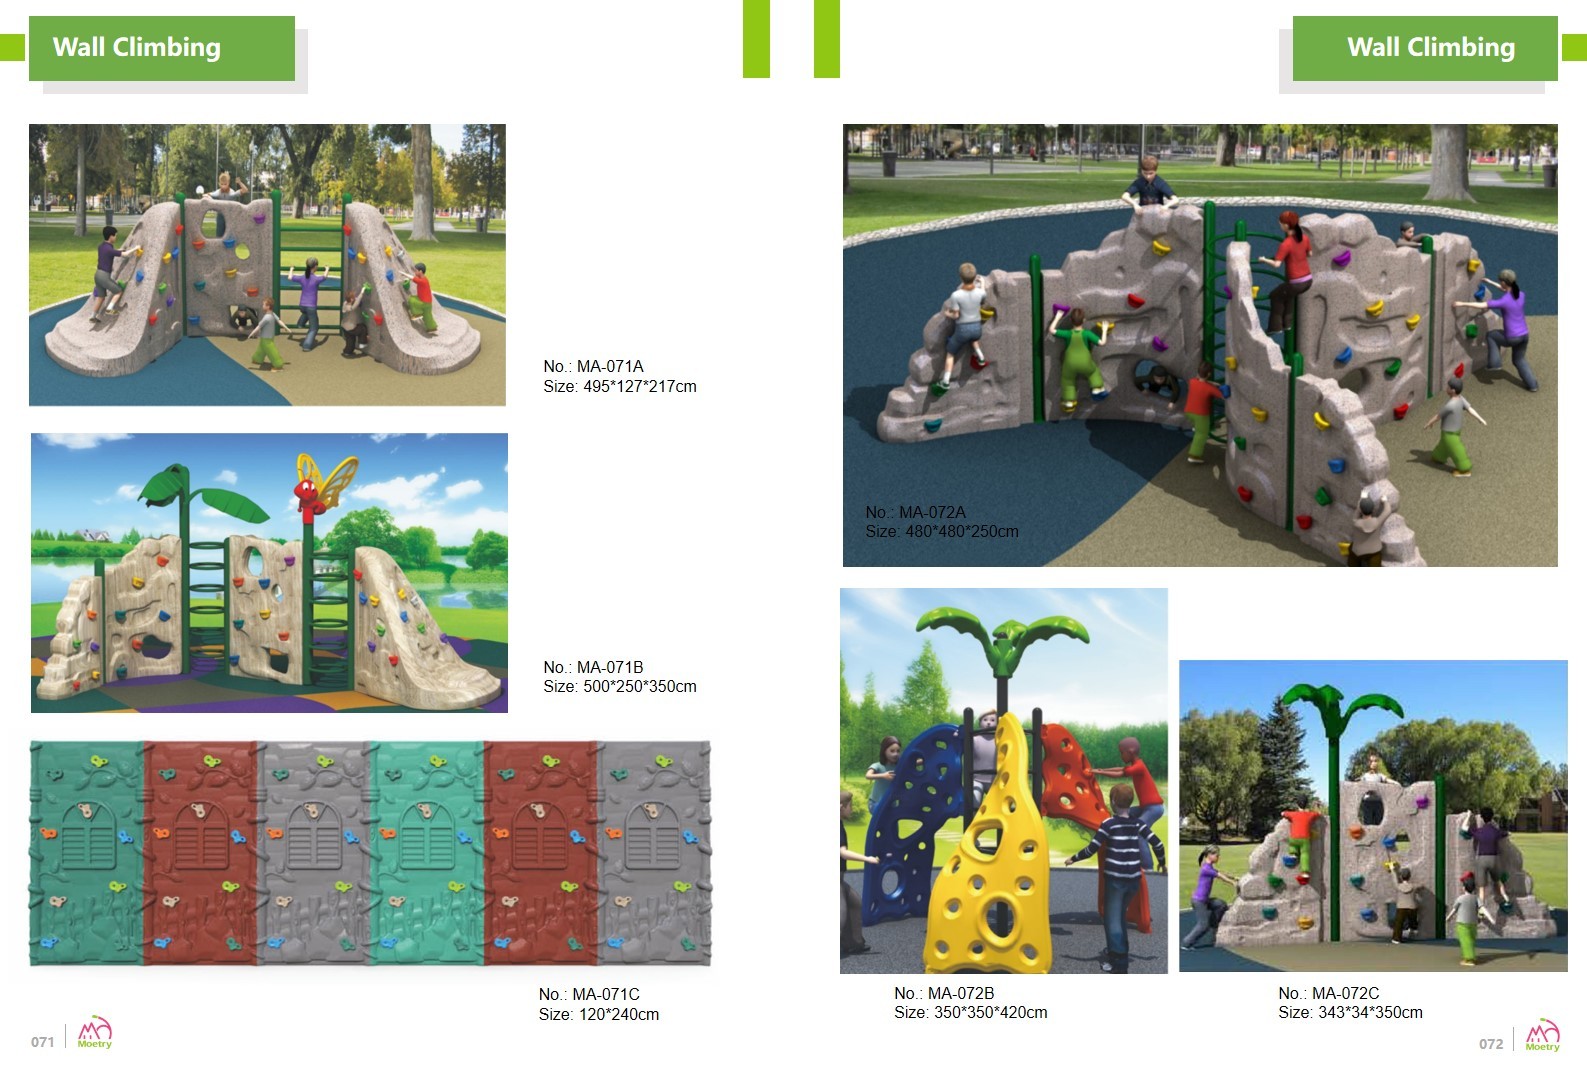 Different types of free standing children's climbing wall rock climber outdoor play equipment in Moetry's catalogue